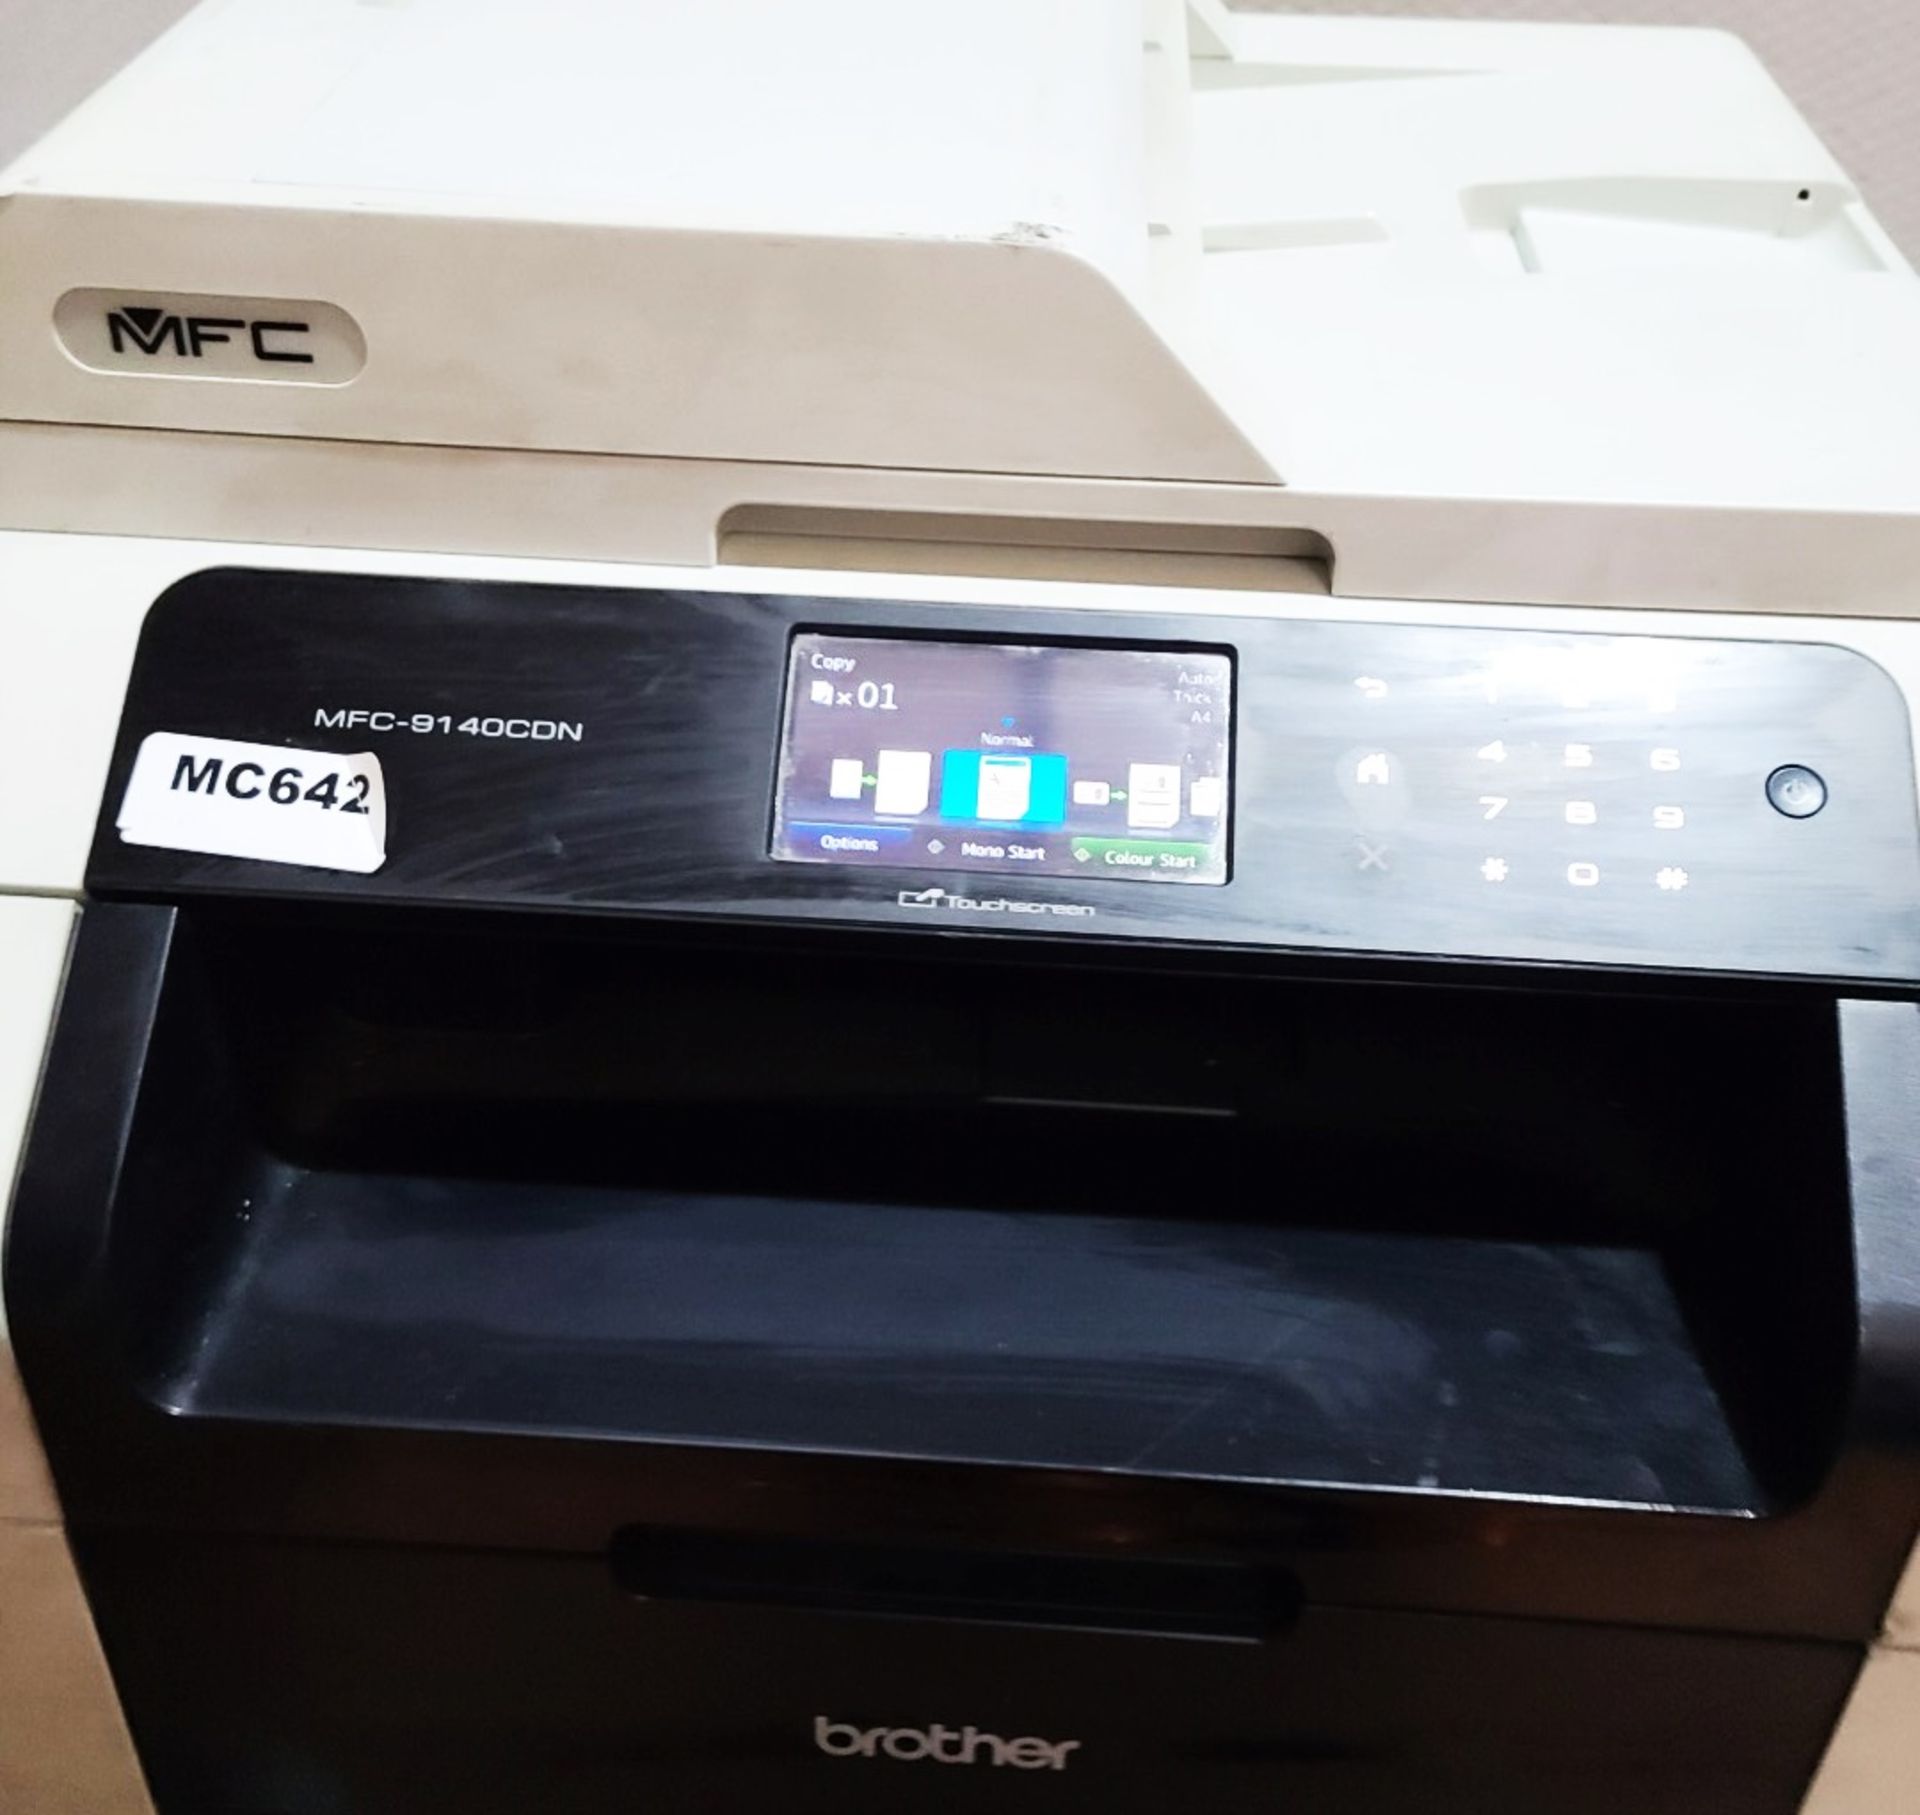 1 x Brother Printer MFC -9140CDN A4 Colour Multifunction Printer/Scanner/Copy/Fax Machine - Image 6 of 7